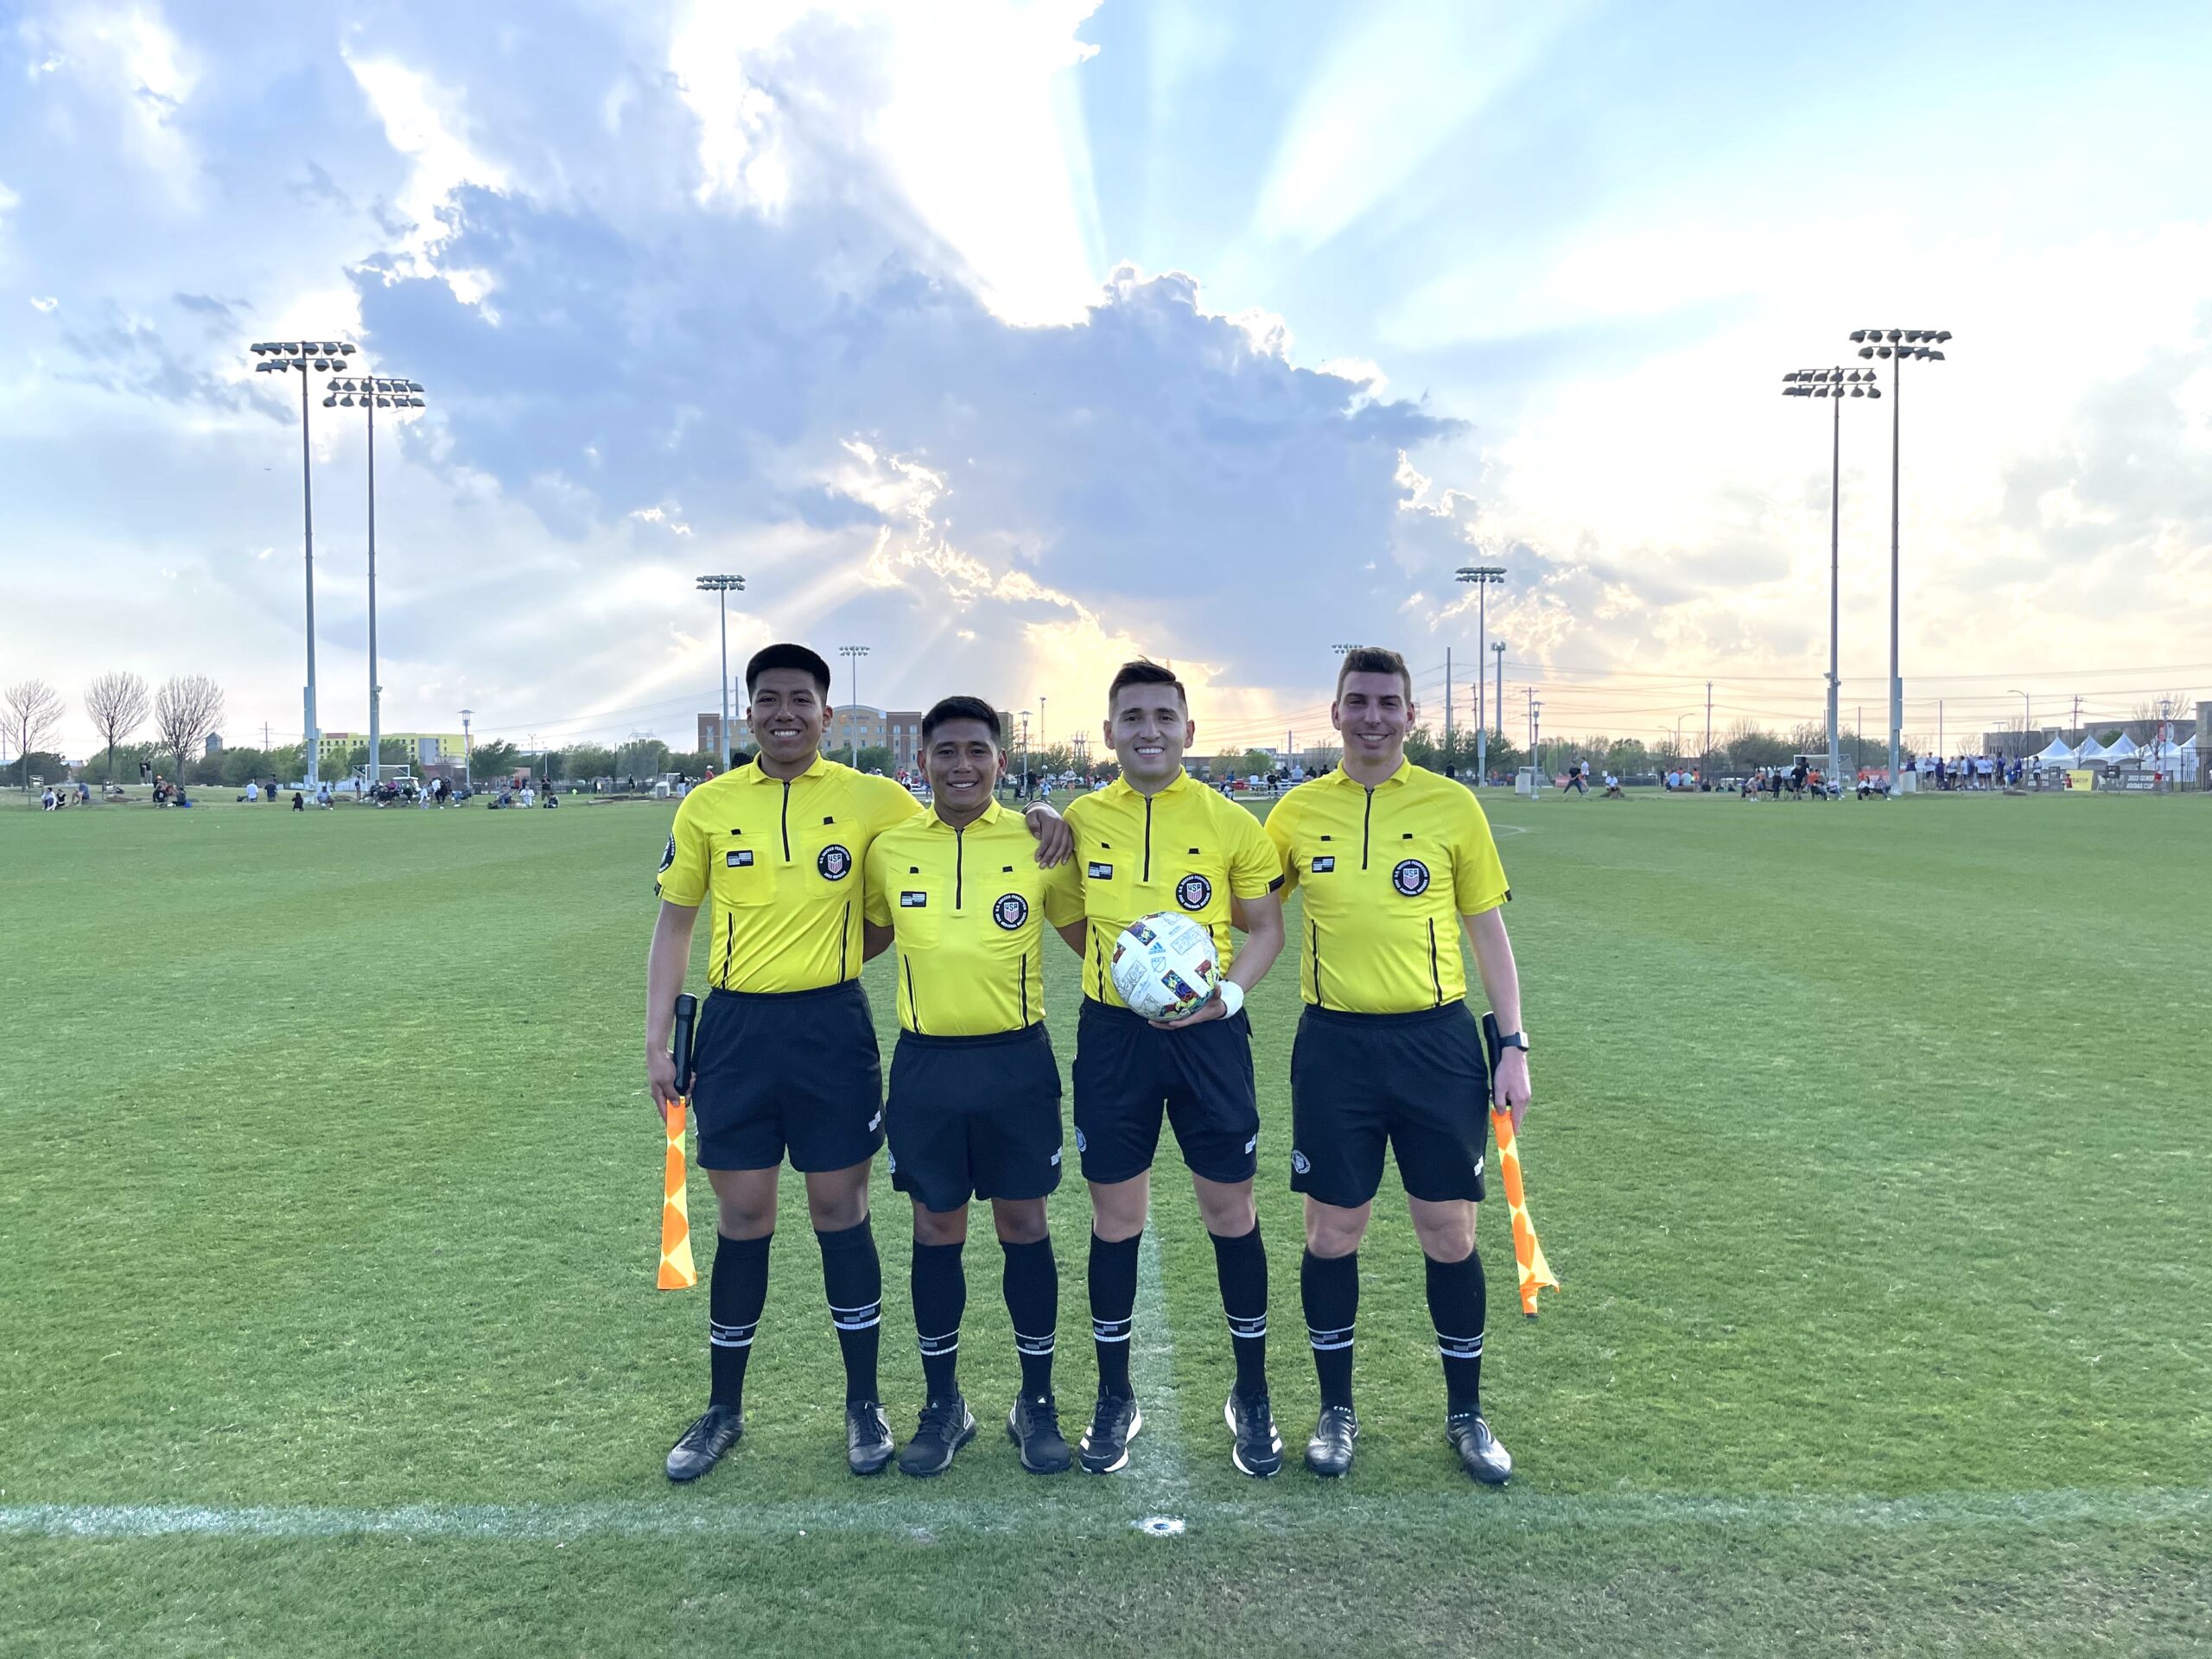 Four referees in yellow holding flags and ball smiling